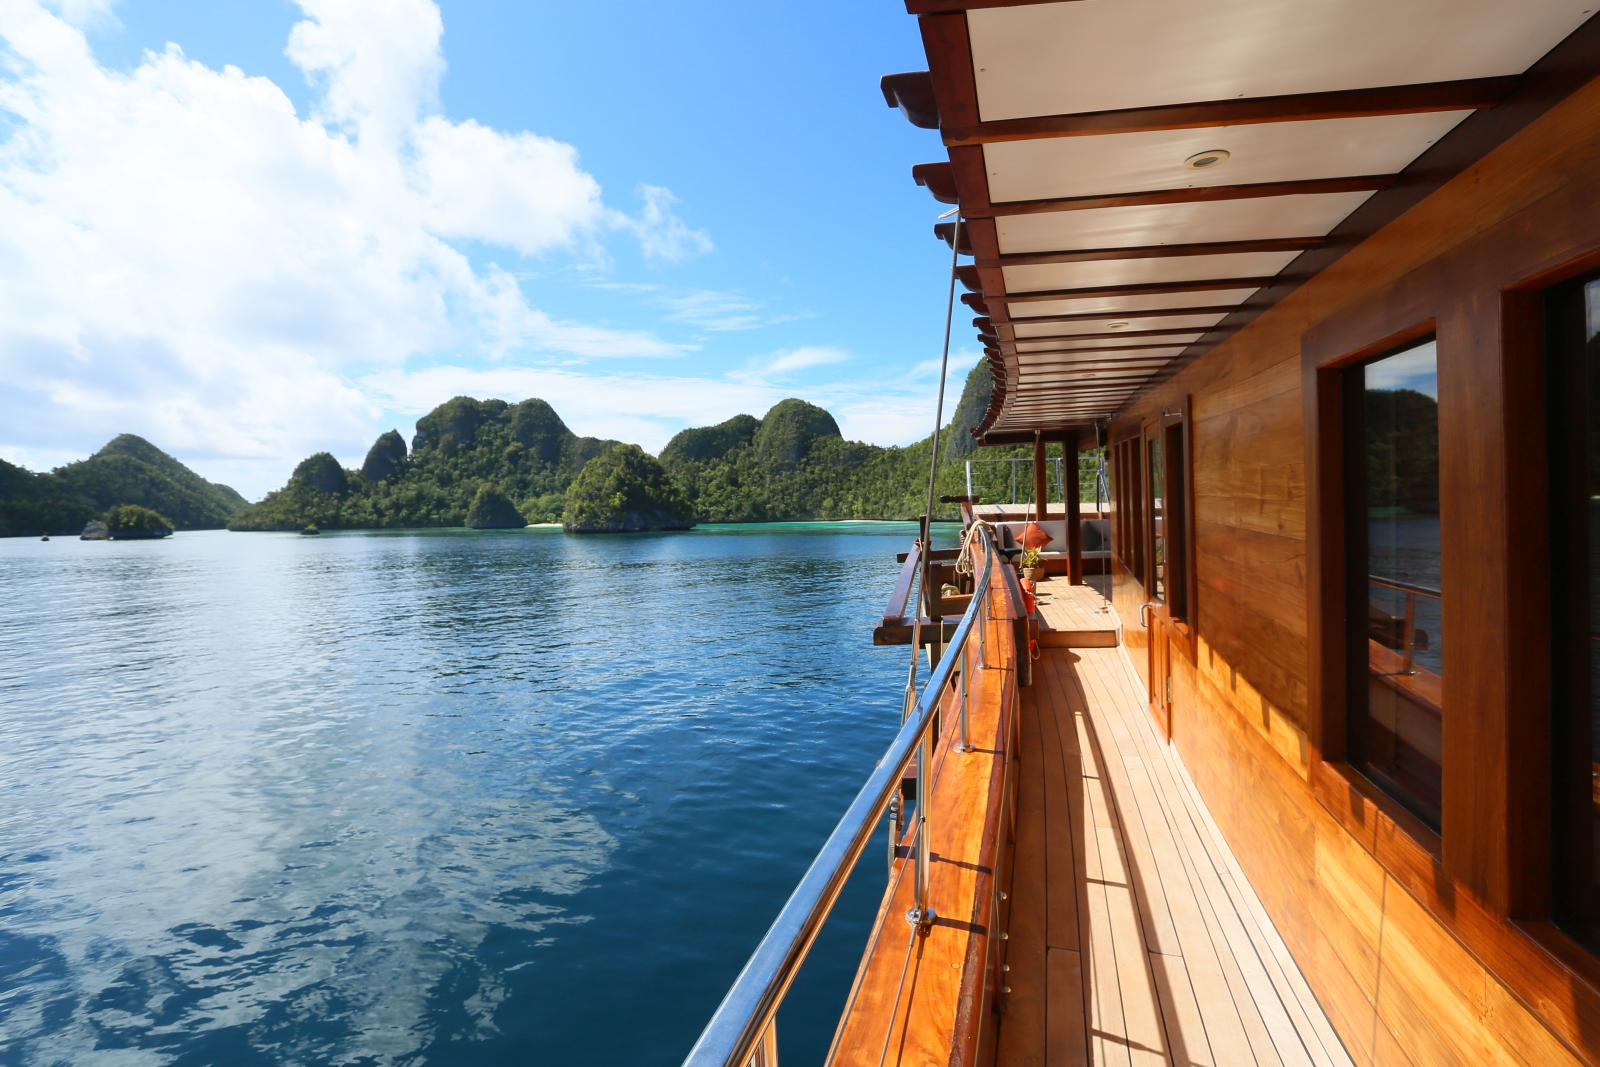 Side decking and passage and Komodo Islands